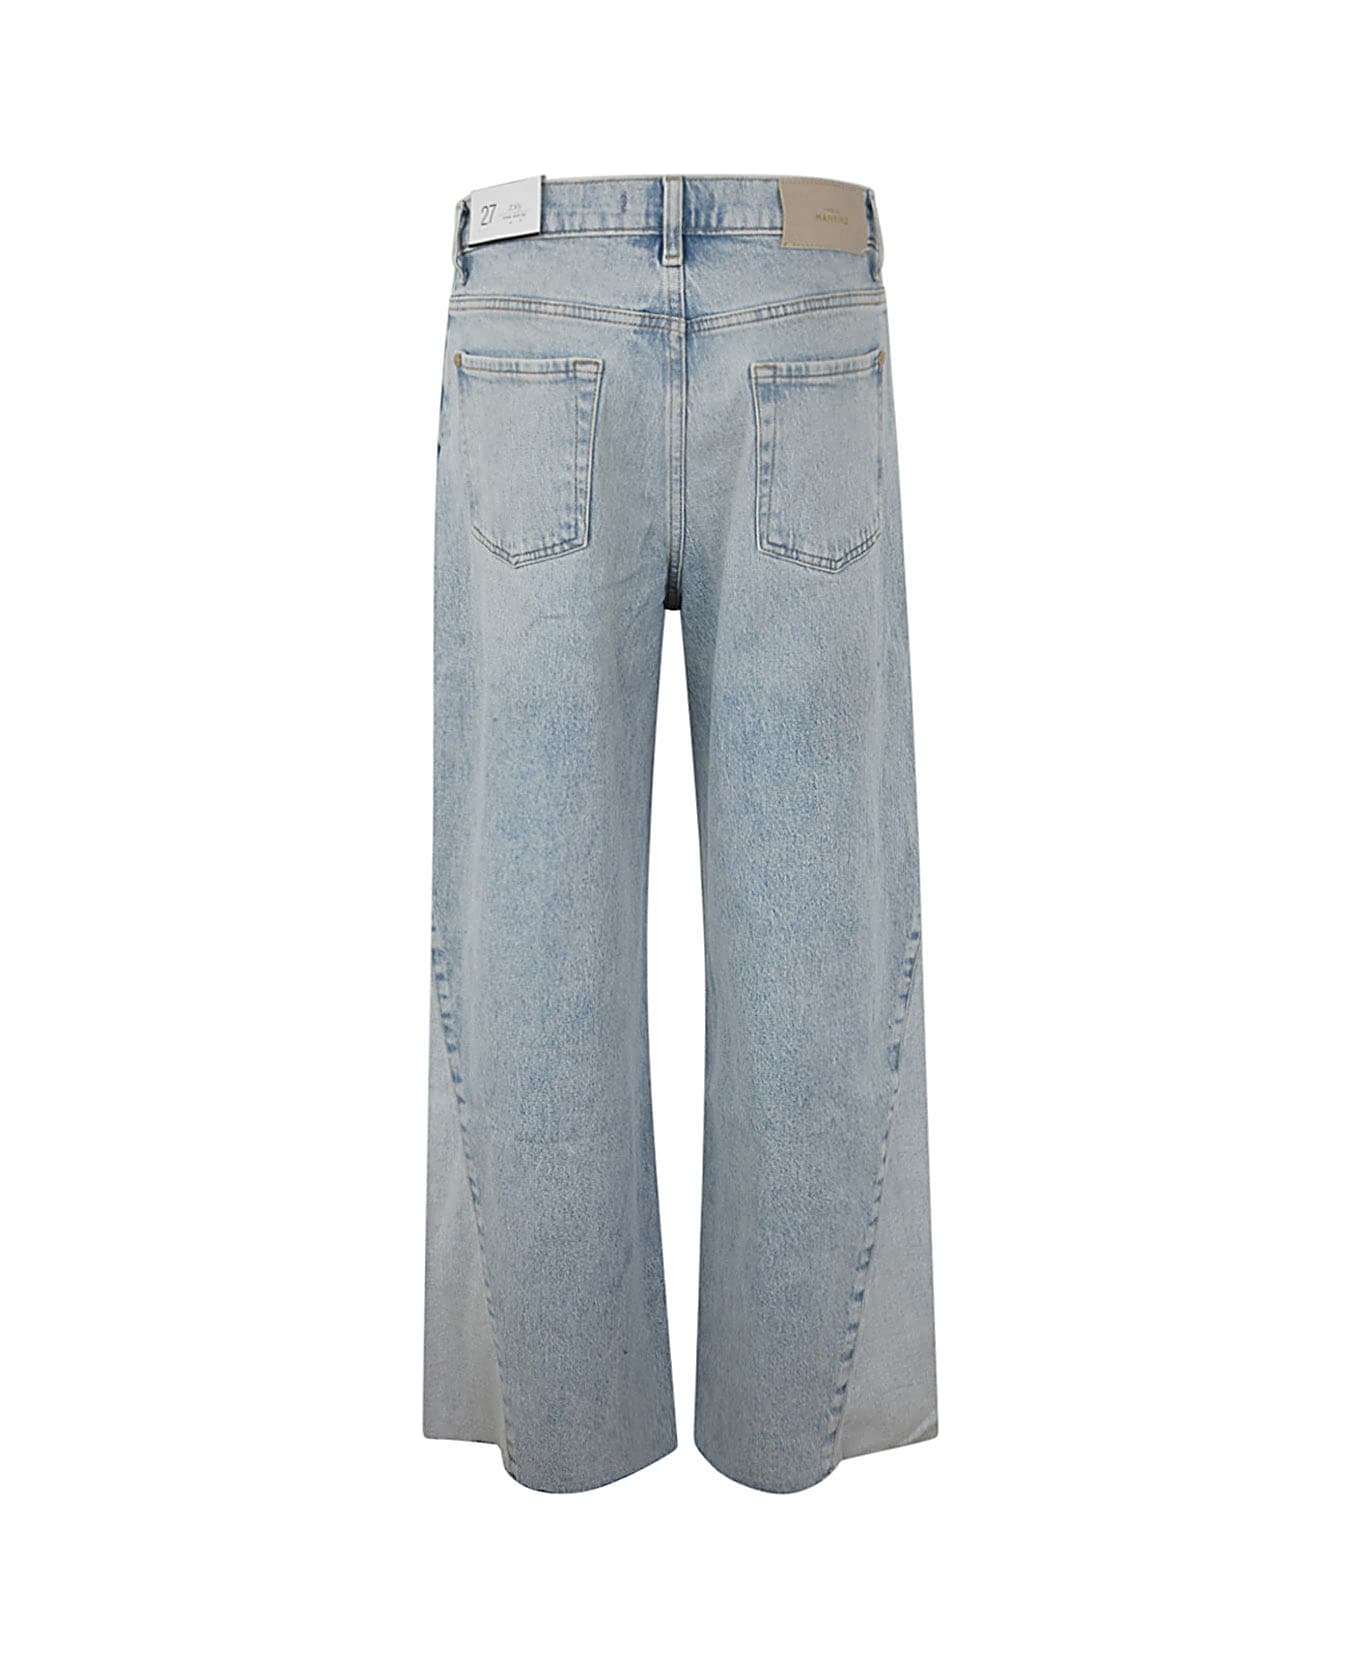 7 For All Mankind Zoey Mid Summer With Panel Jeans - Light Blue デニム